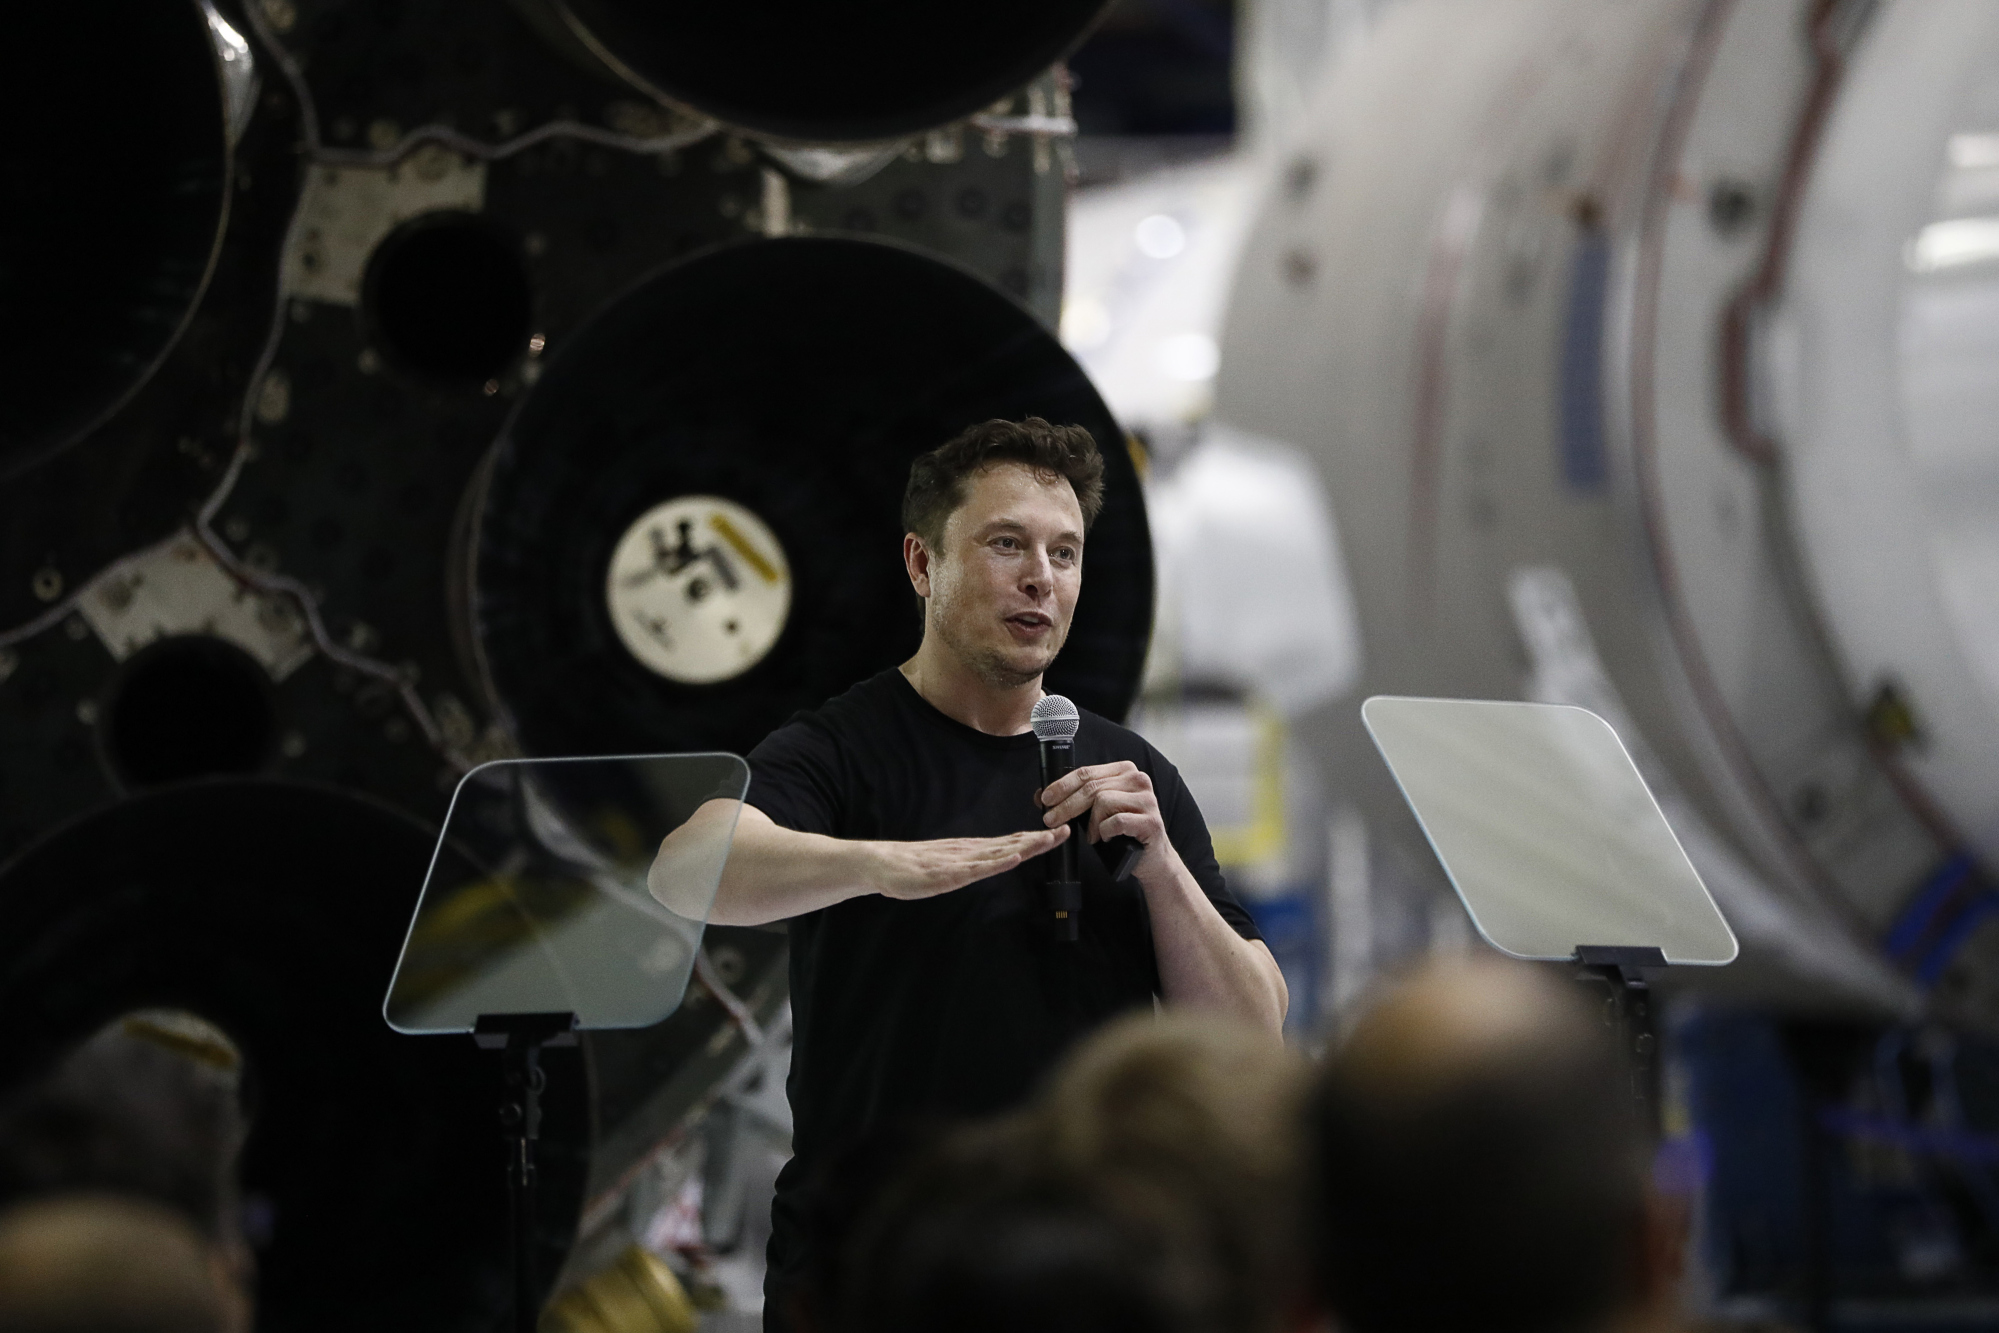 Elon Musk&nbsp;speaks during an event at the SpaceX headquarters in Hawthorne, California.